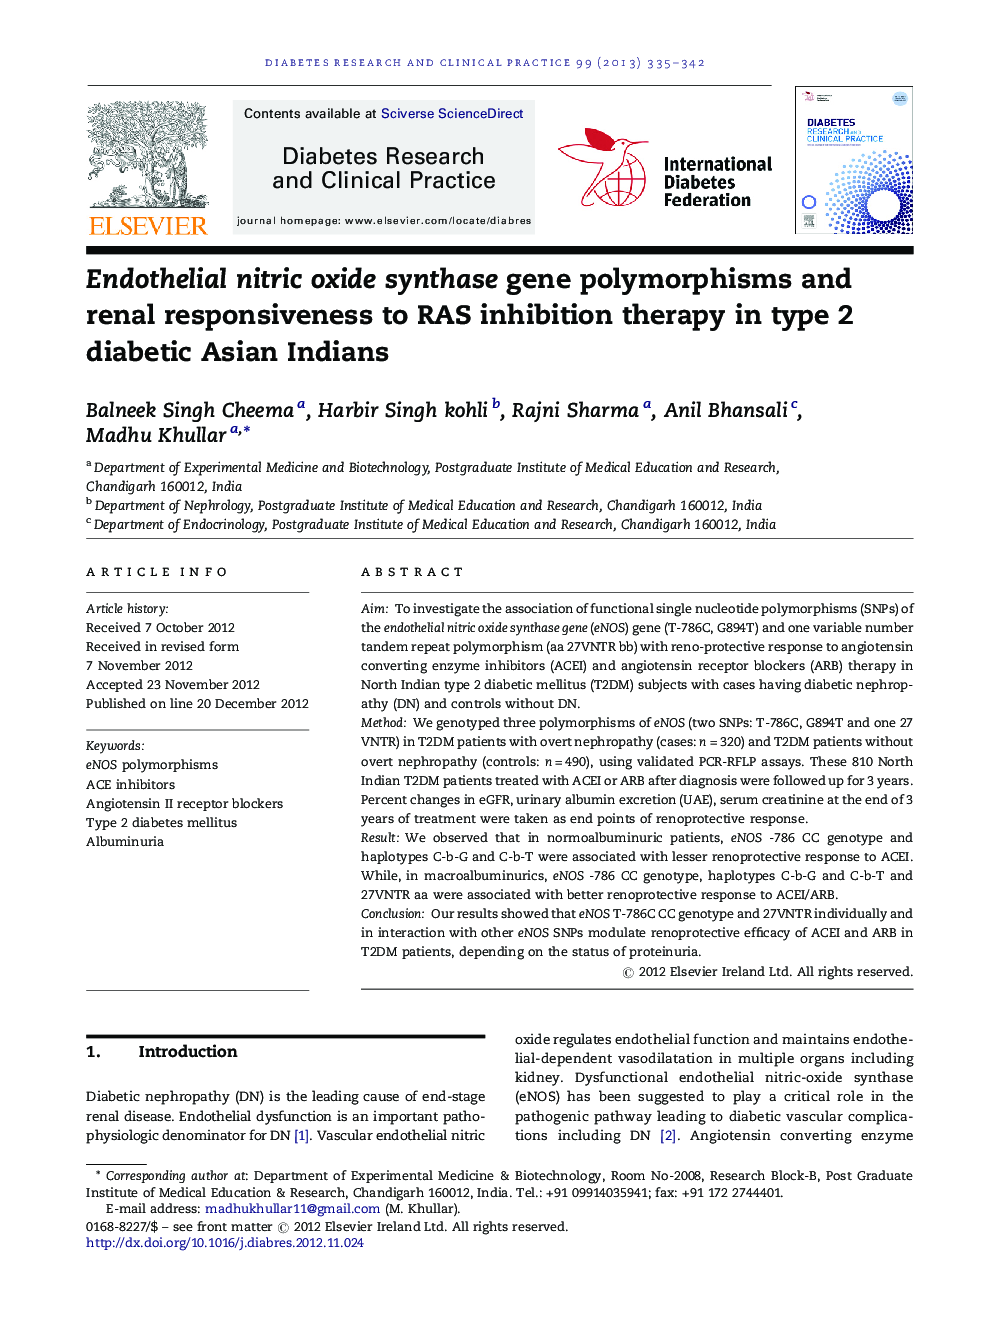 Endothelial nitric oxide synthase gene polymorphisms and renal responsiveness to RAS inhibition therapy in type 2 diabetic Asian Indians